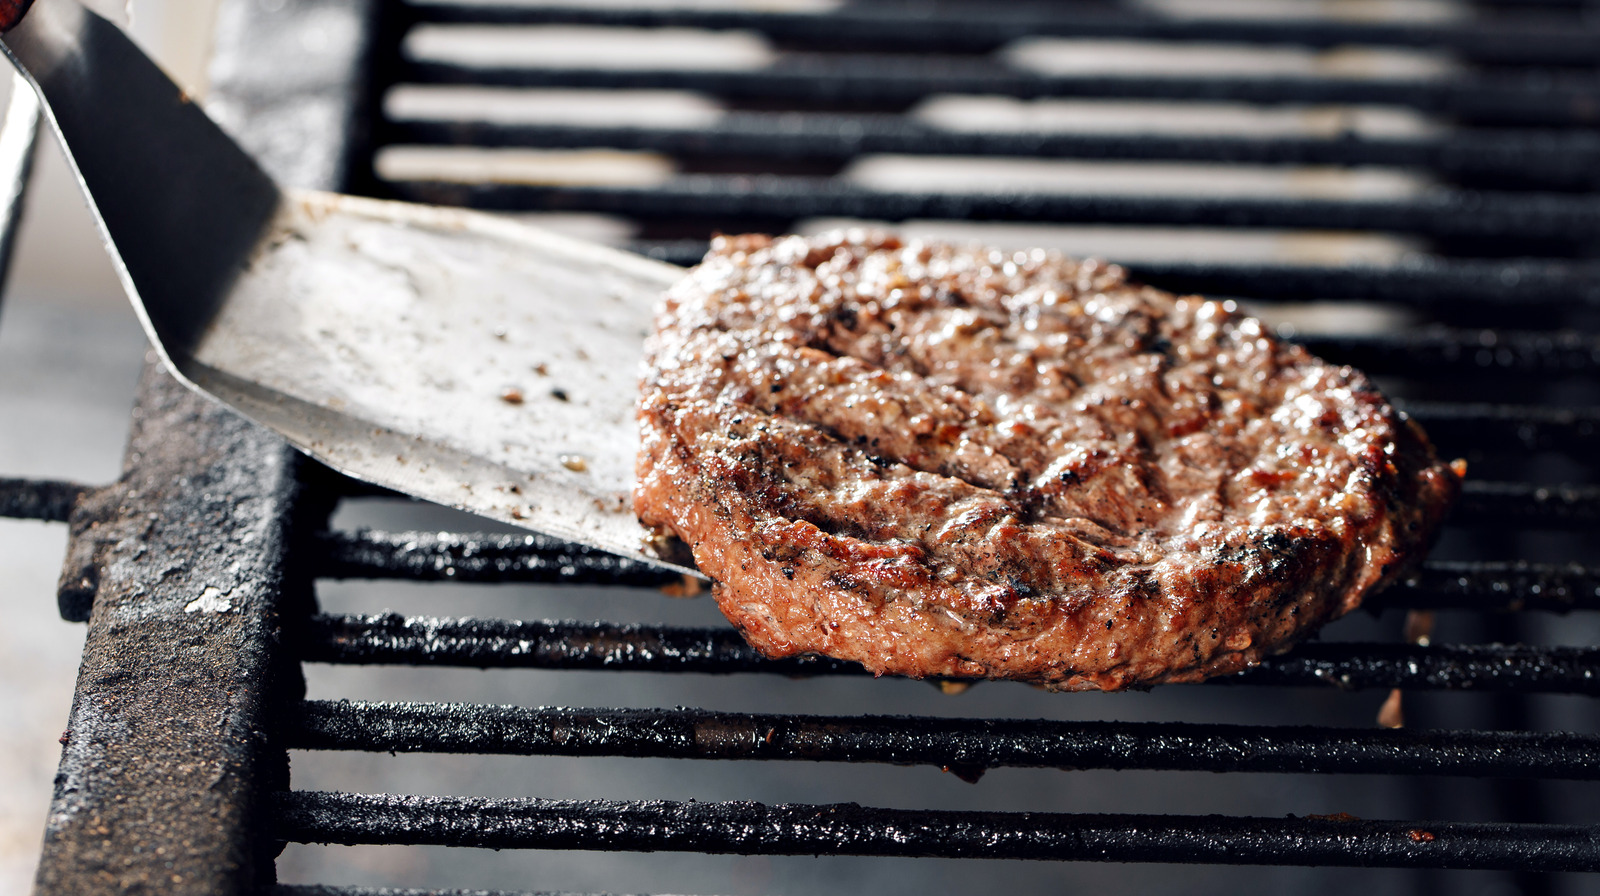 Can Flipping Burgers Too Often Actually Ruin Them?